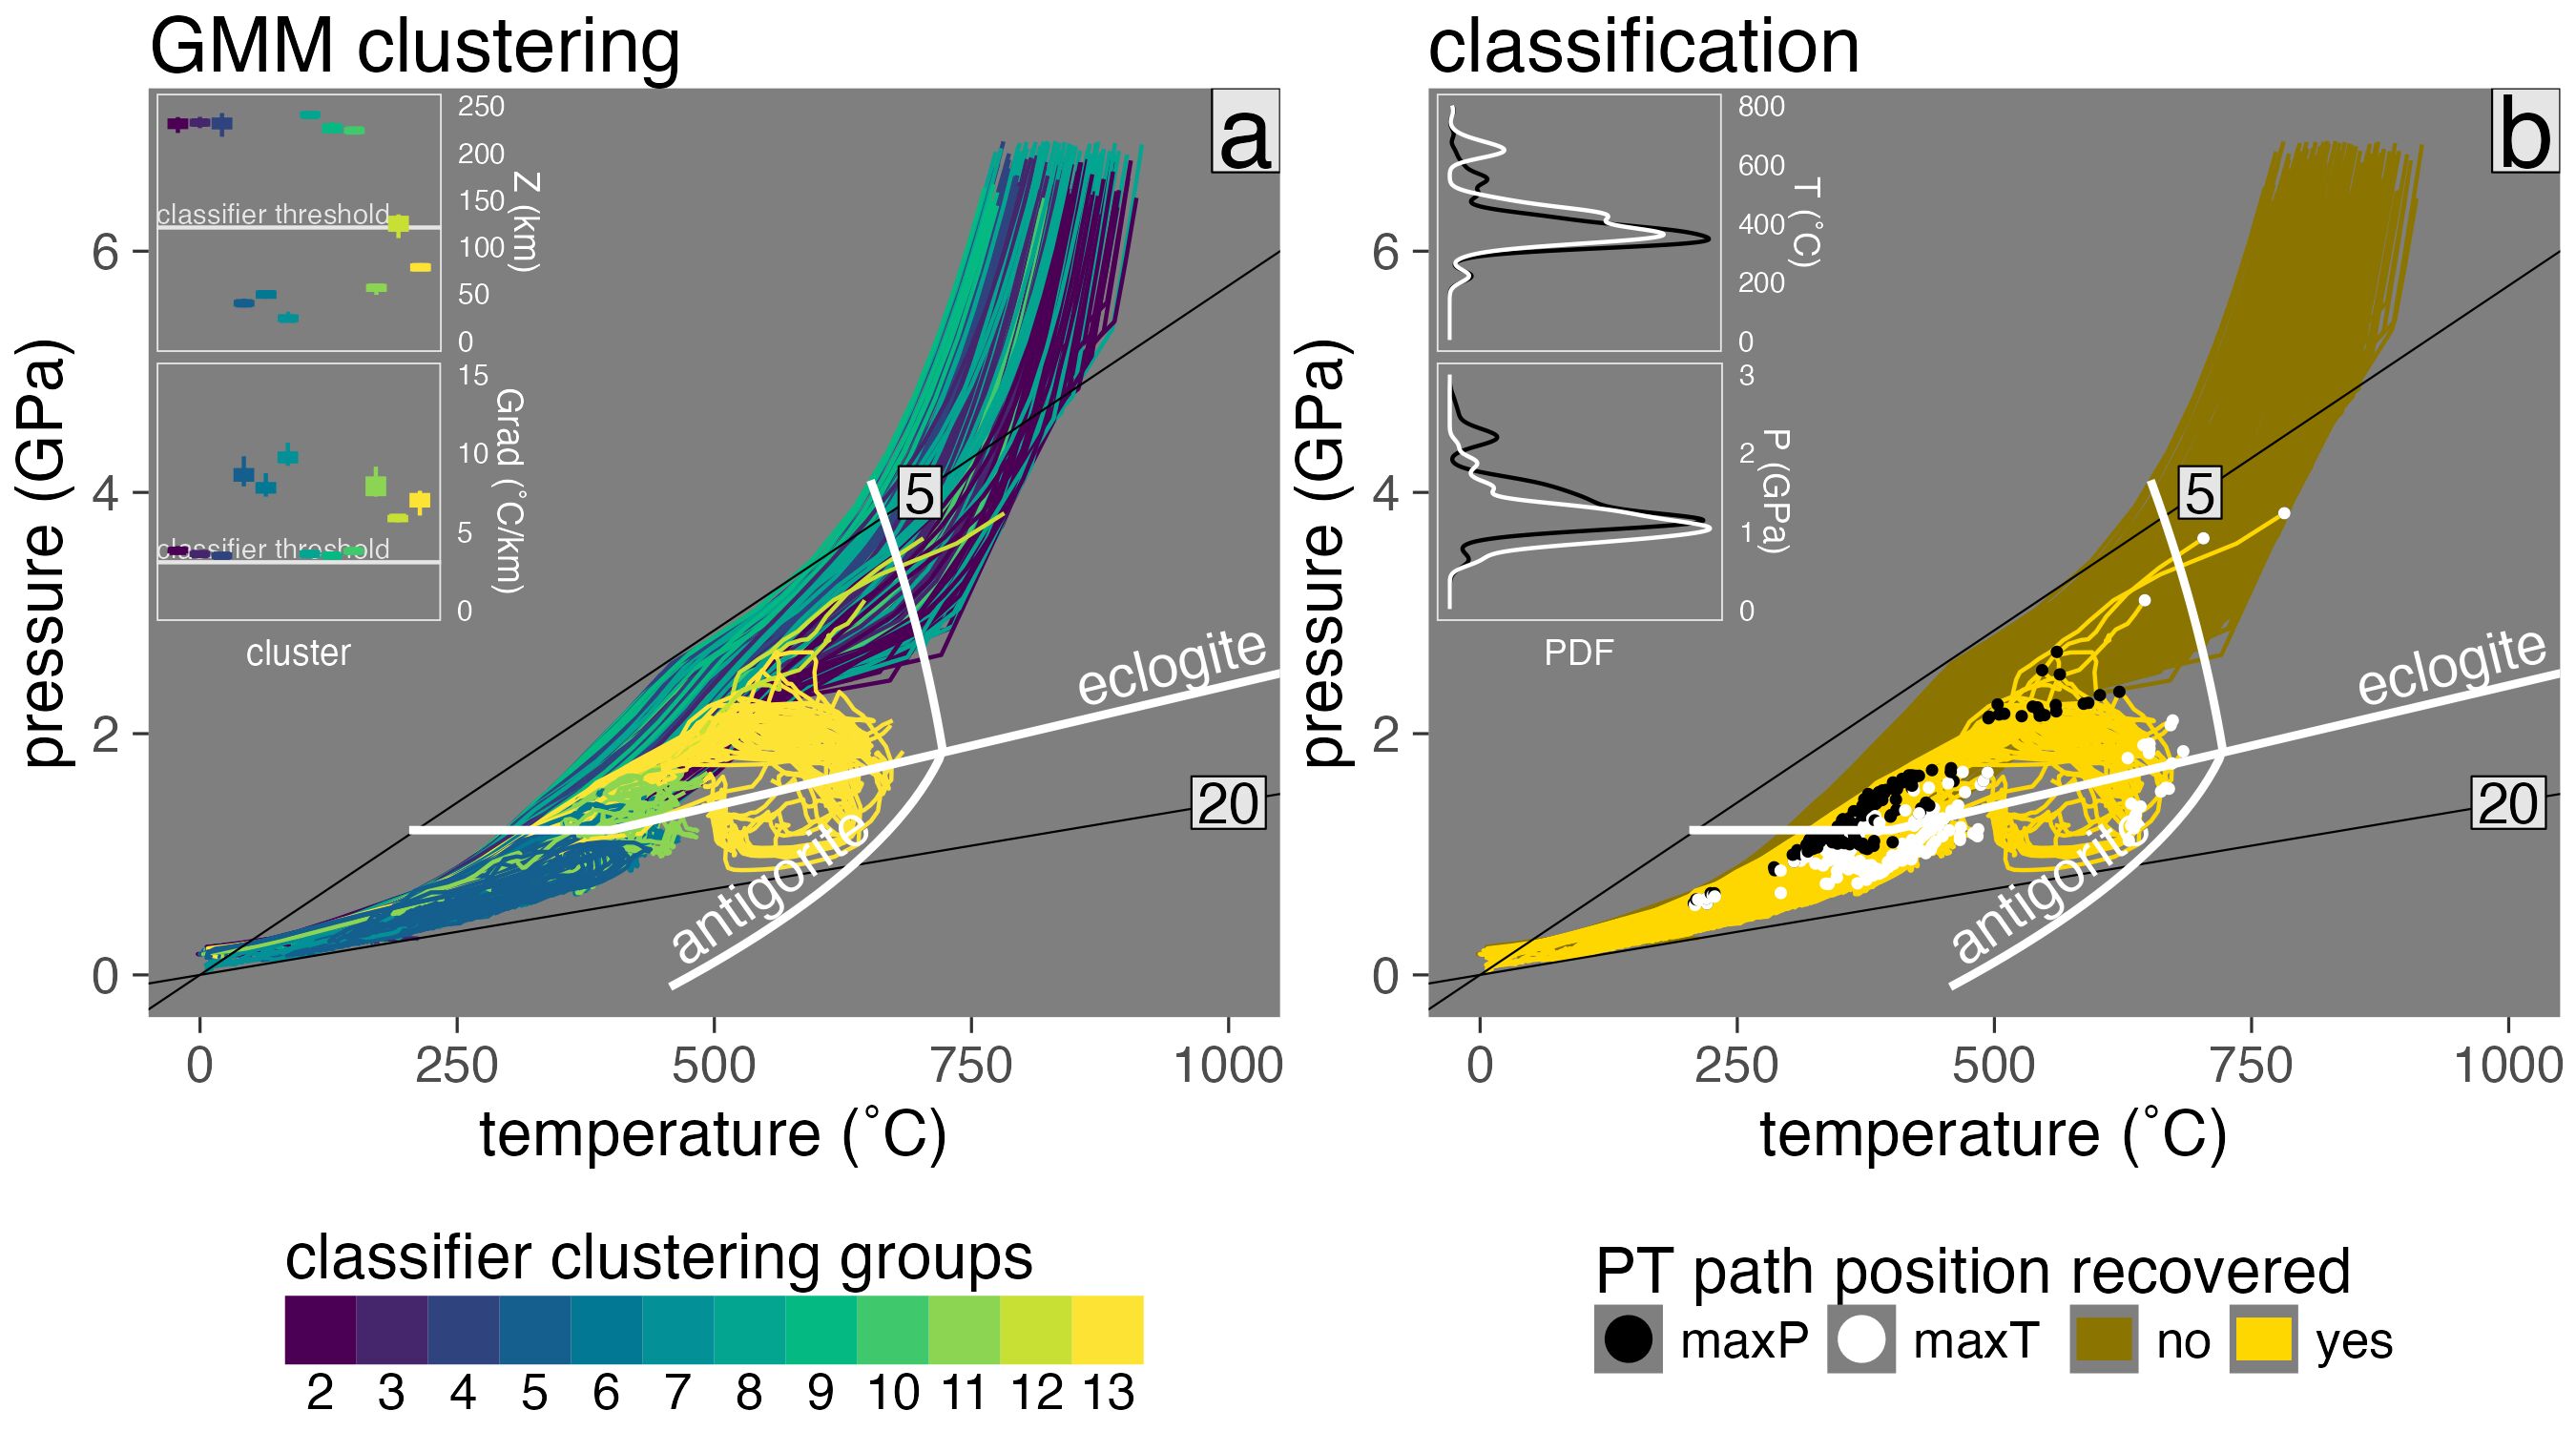 Example of marker classification for model cda62. (a) PT diagram showing marker clusters as assigned by Gaussian mixture modeling (GMM; colored PT paths). Boxplots showing depth and thermal gradient distributions of marker clusters assigned by GMM. Markers belonging to clusters with centroids (means) positioned at ≤ 120 km (top inset) and ≥ 3 ˚C/km (bottom inset) are classified as recovered. All others are classified as not recovered. (b) PT diagram showing marker classification results (colored PT paths) and various marker positions along their PT paths (black, white, and pink points). Thin lines are thermal gradients labeled in ˚C/km. Only a random subset of markers is shown. (insets) Probability distribution functions showing the distribution of T’s (top inset) and P’s (bottom inset) for recovered markers at maxP (black lines) and maxT (white lines) conditions. In this experiment, a significant number of markers have different peak metamorphic conditions between their maxT and maxP positions.